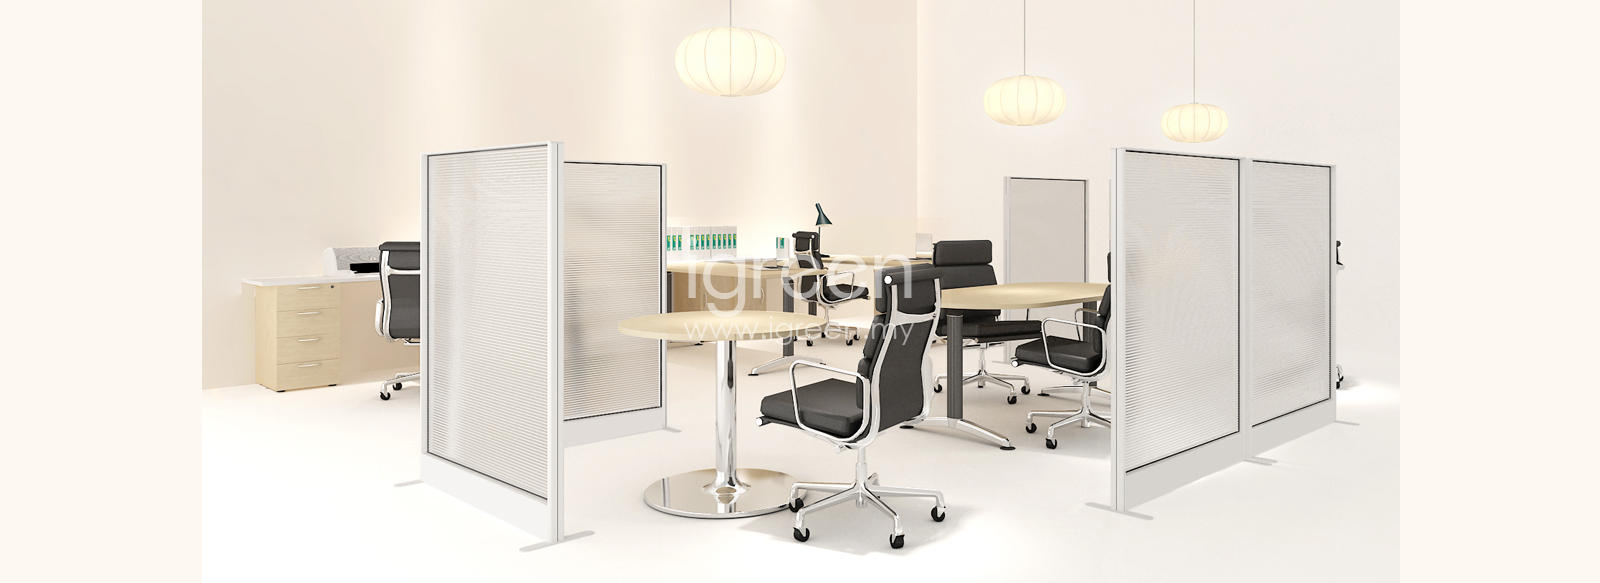 Tender Series Design Divider Screen Office System Concept Malaysia